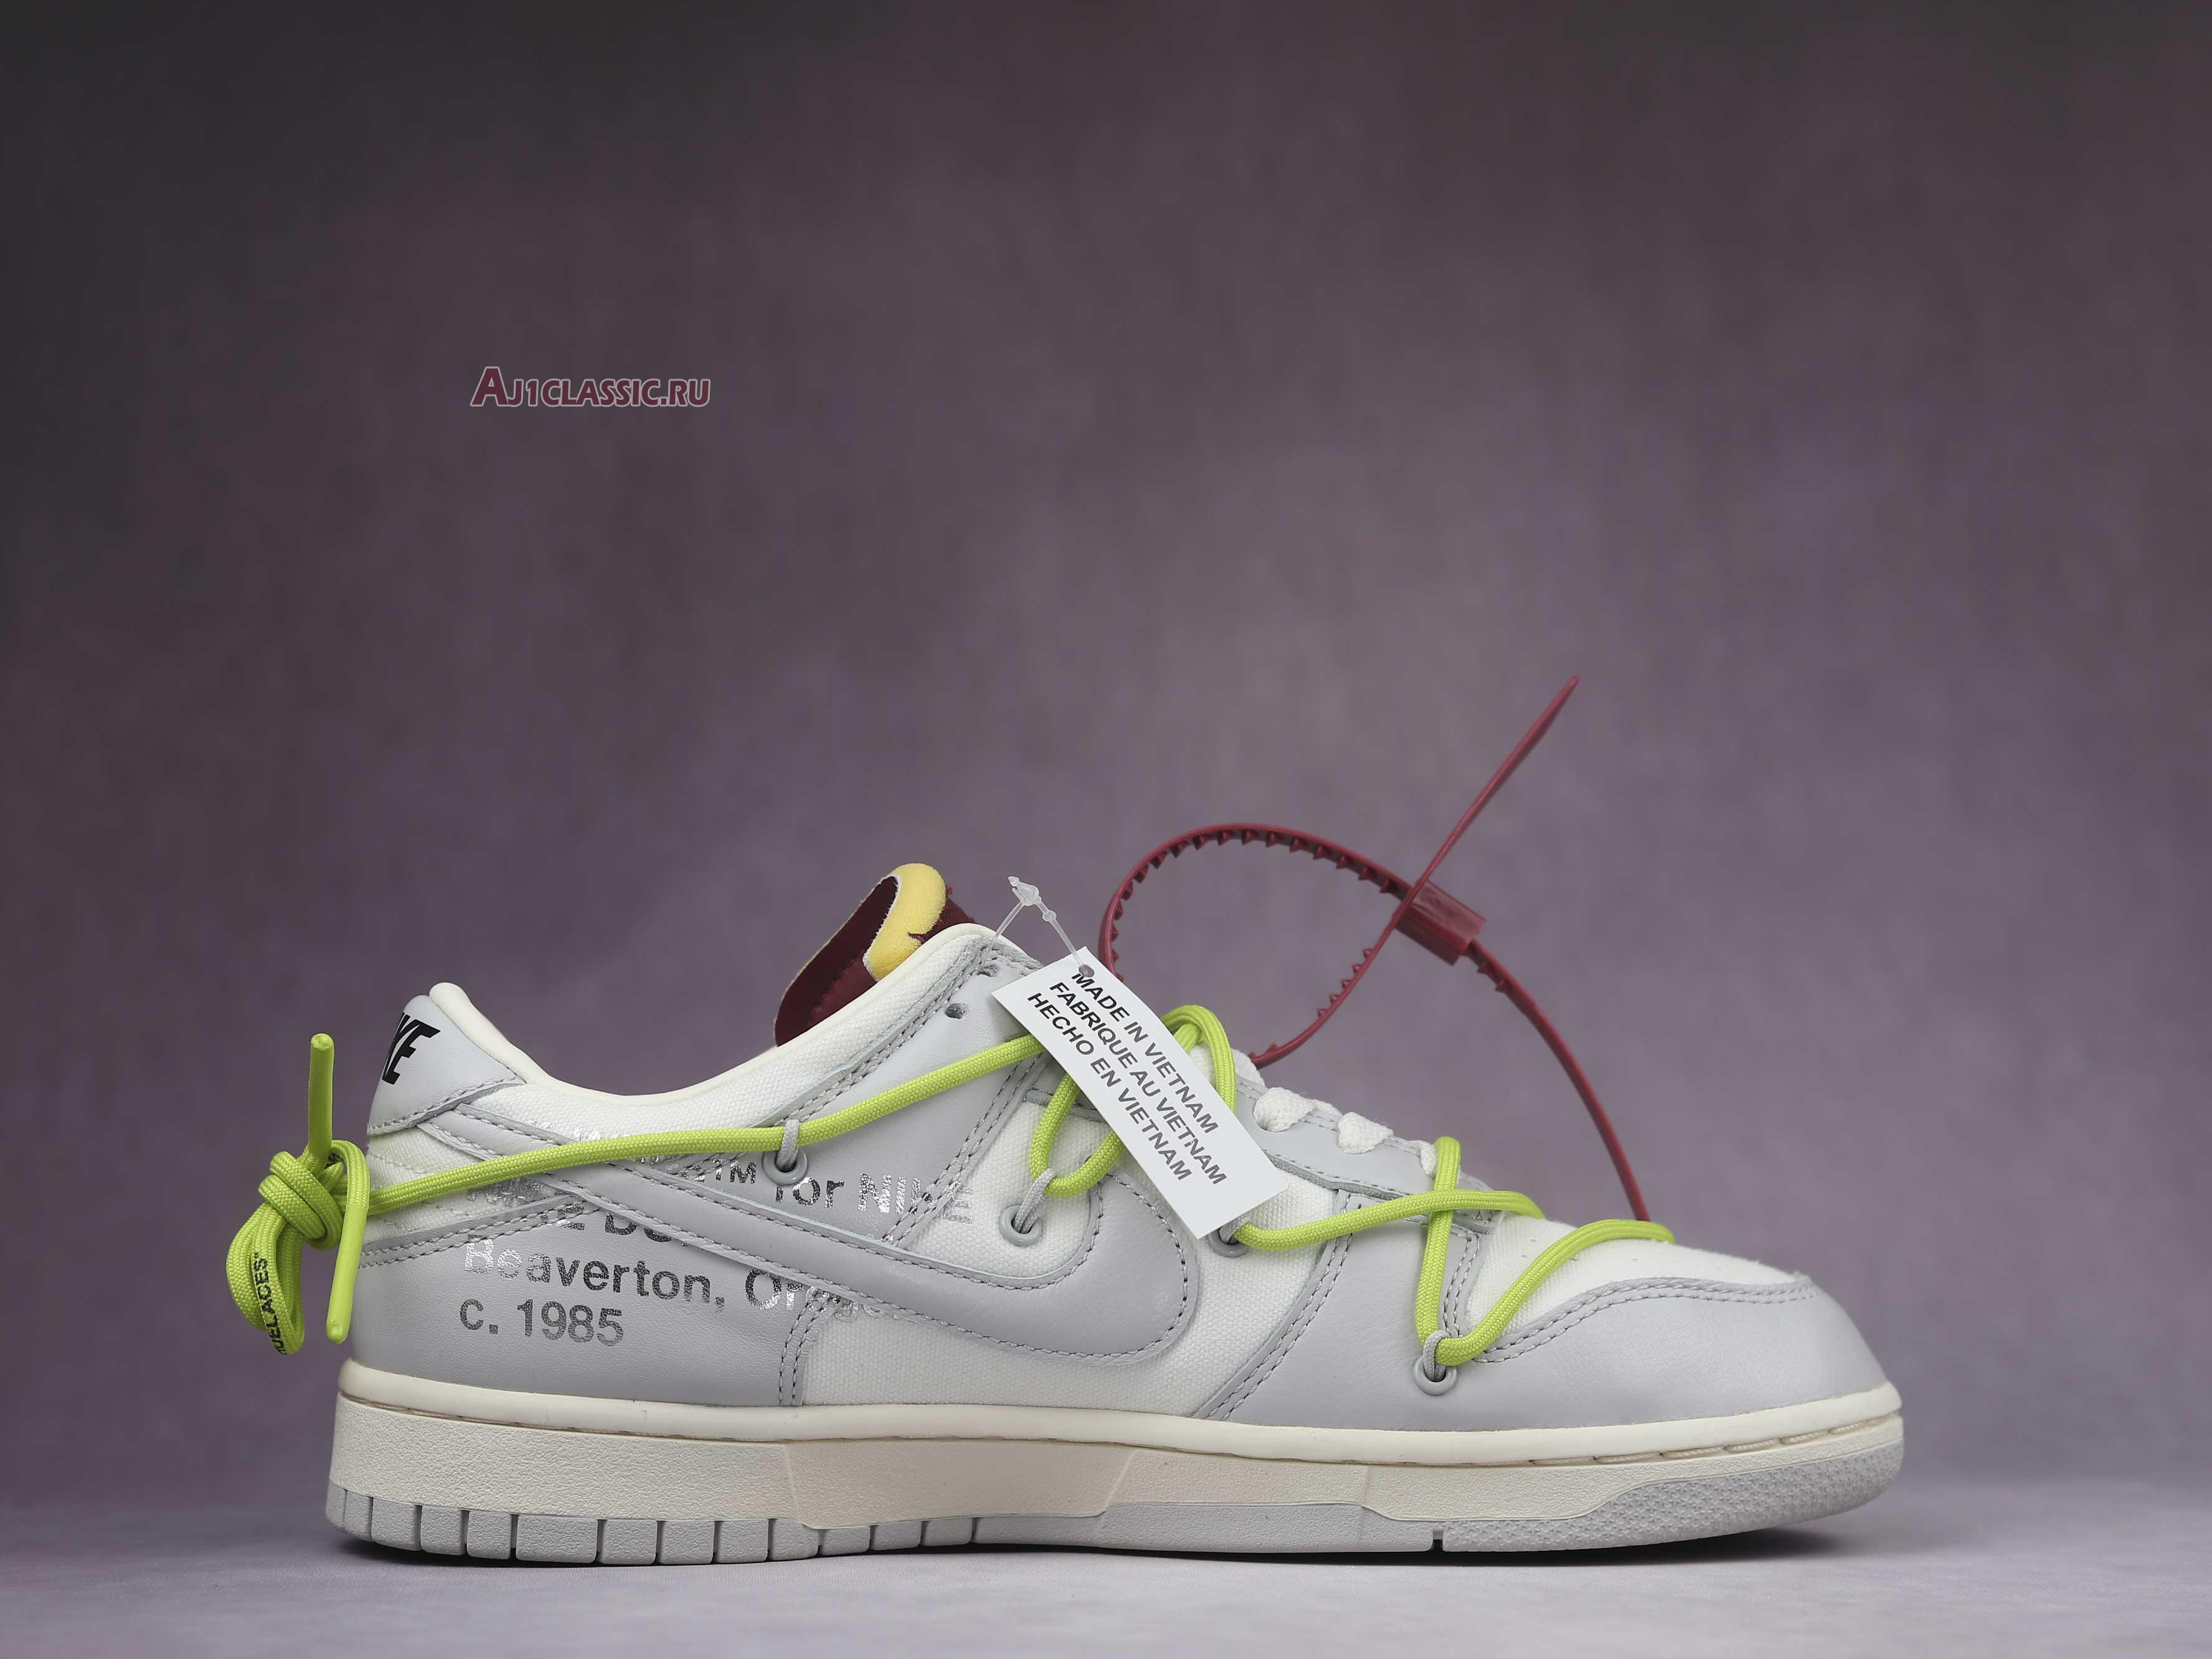 Off-White x Nike Dunk Low "Lot 08 of 50" DM1602-106